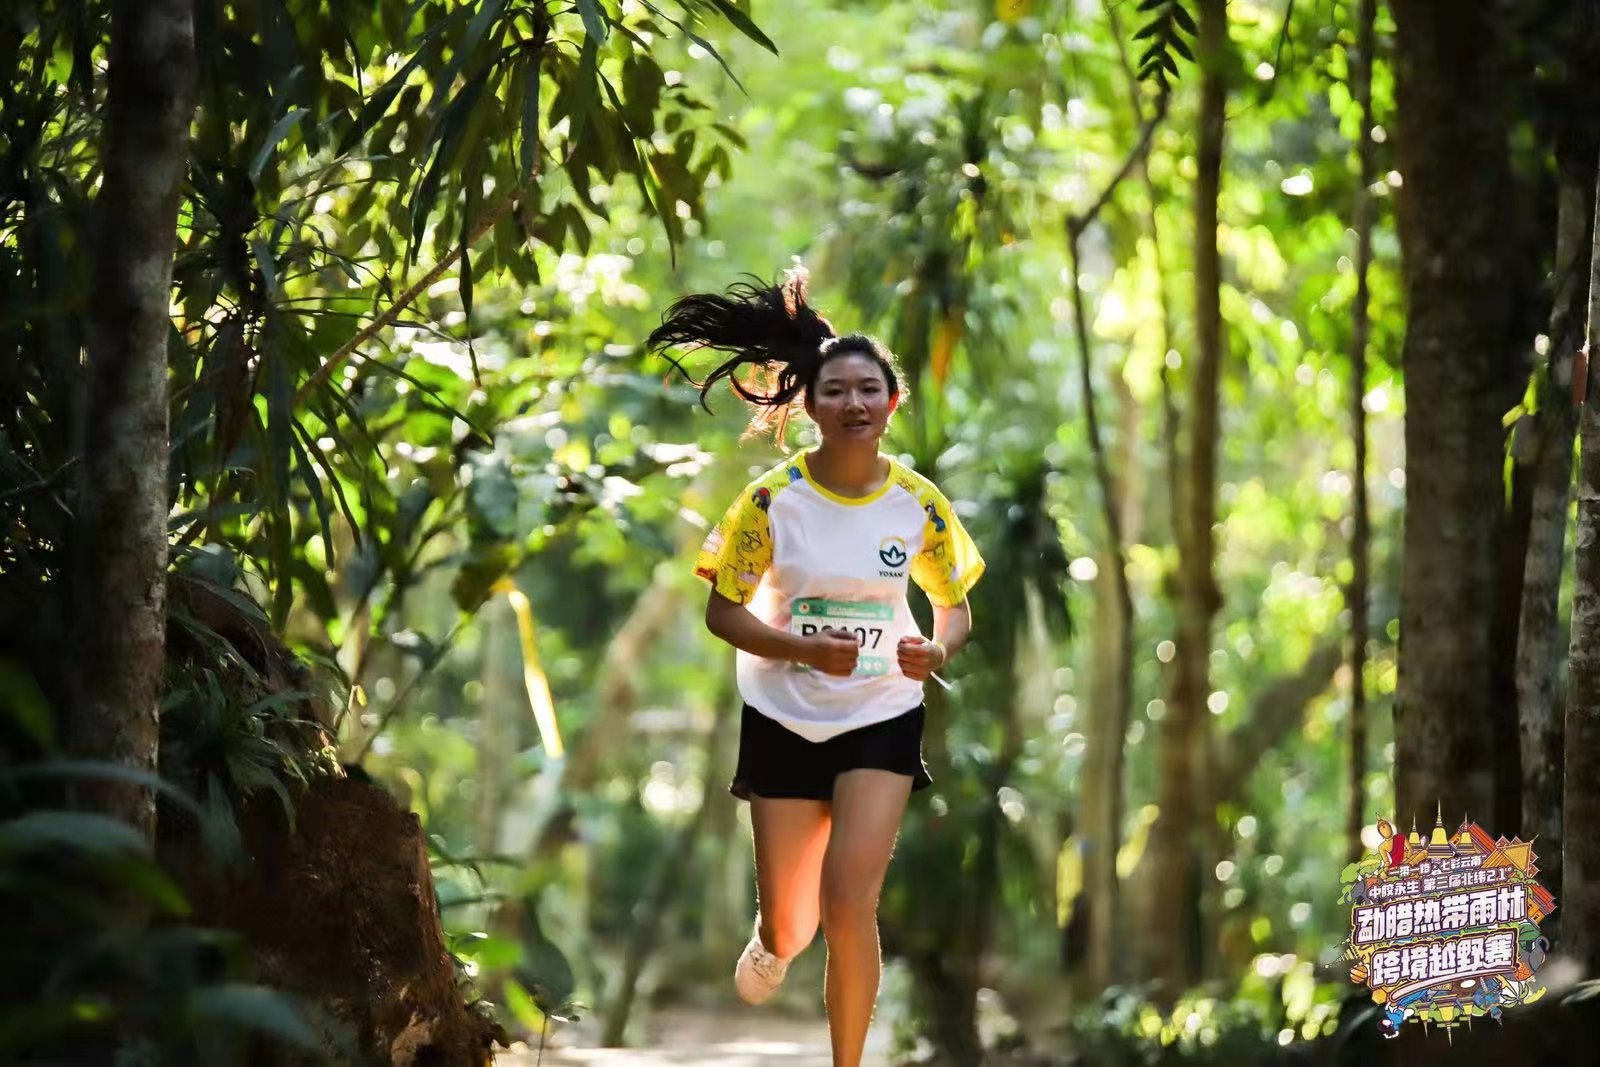 Celebrating New Year by running in tropical rainforest in Xishuangbanna